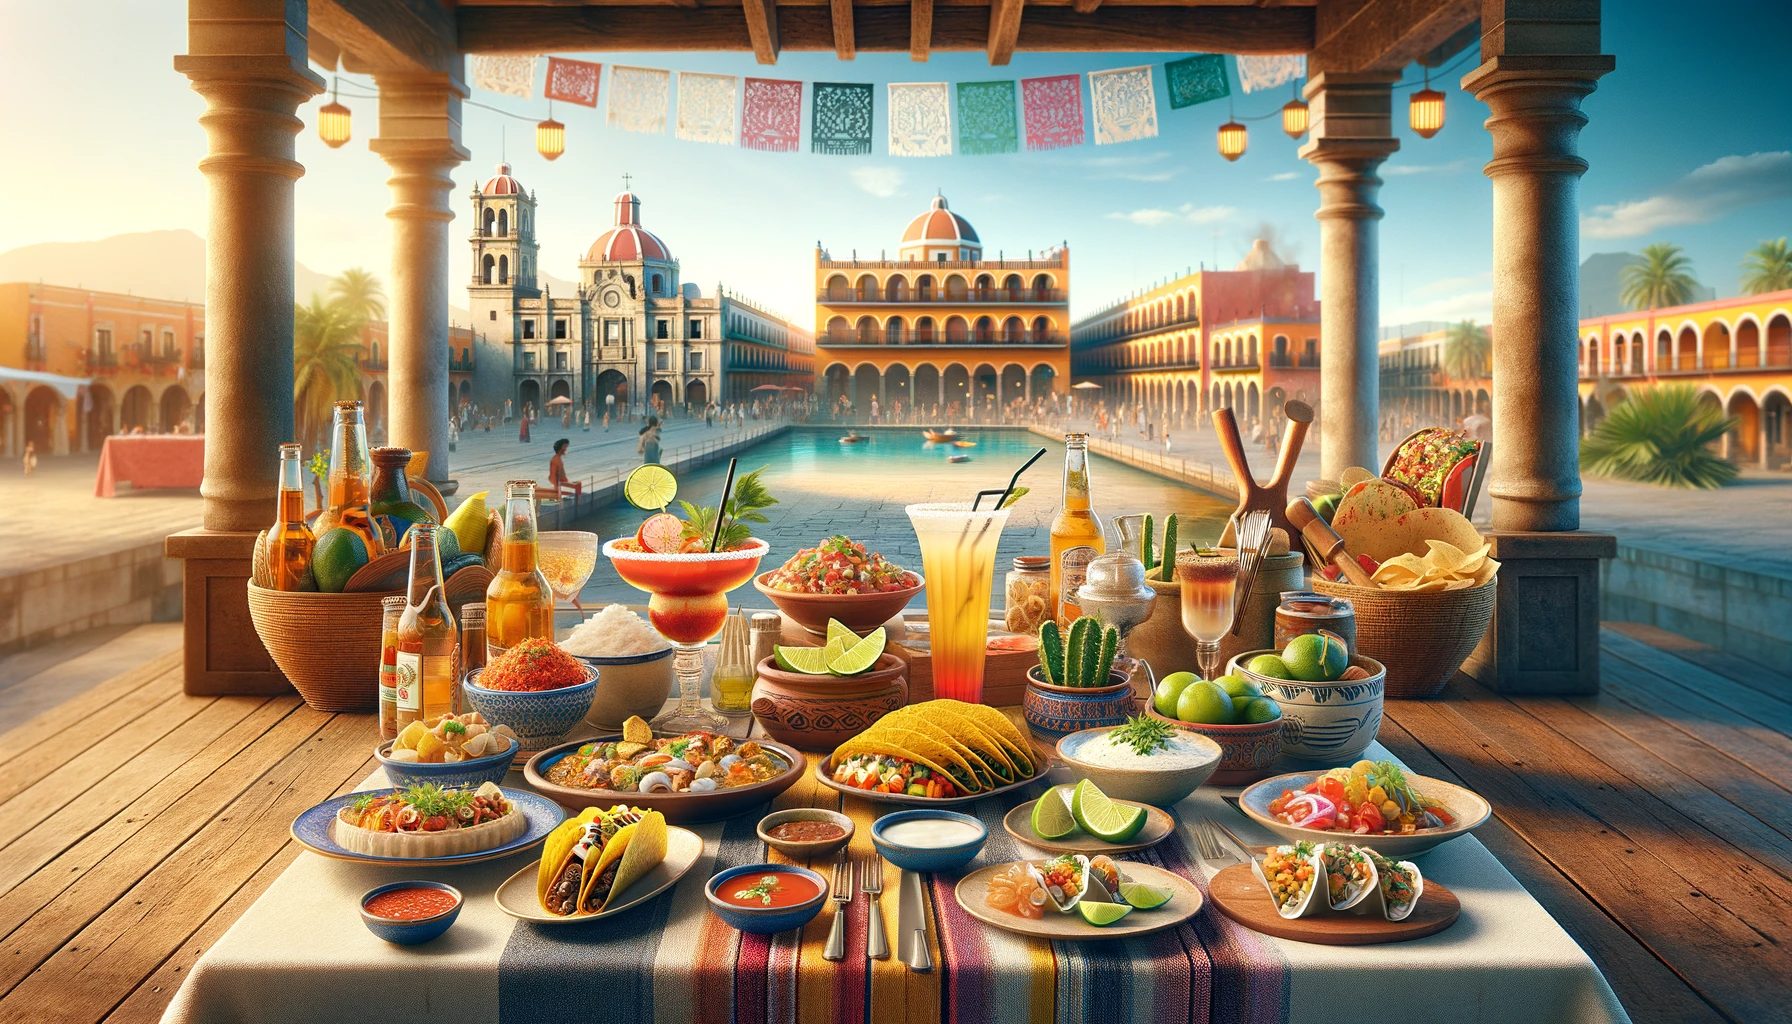 Festive Mexican feast with scenic town square view.